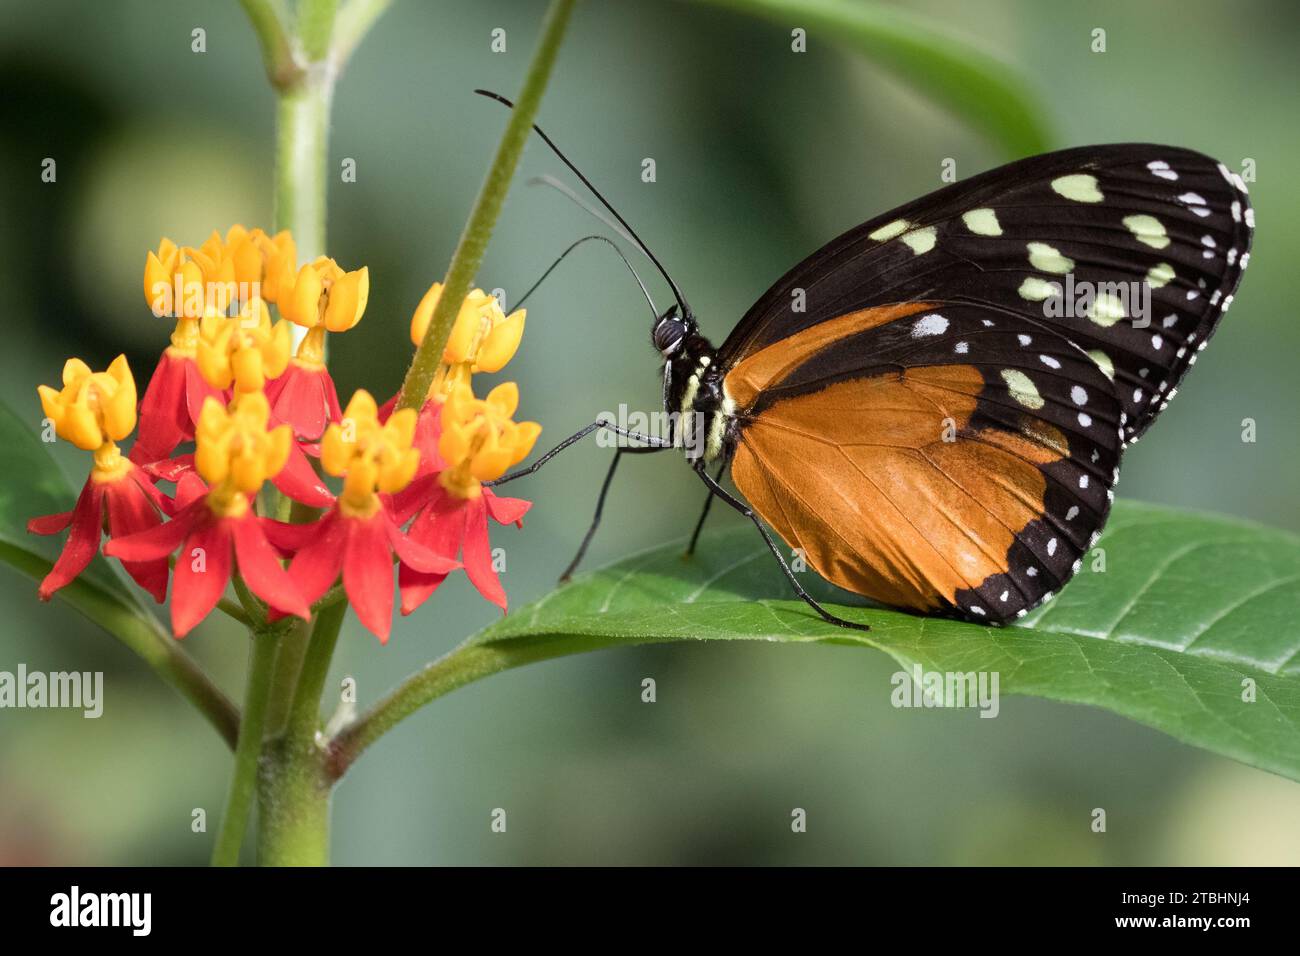 Closeup of tigerwing butterfly on green leaf sipping nectar from flowers Stock Photo